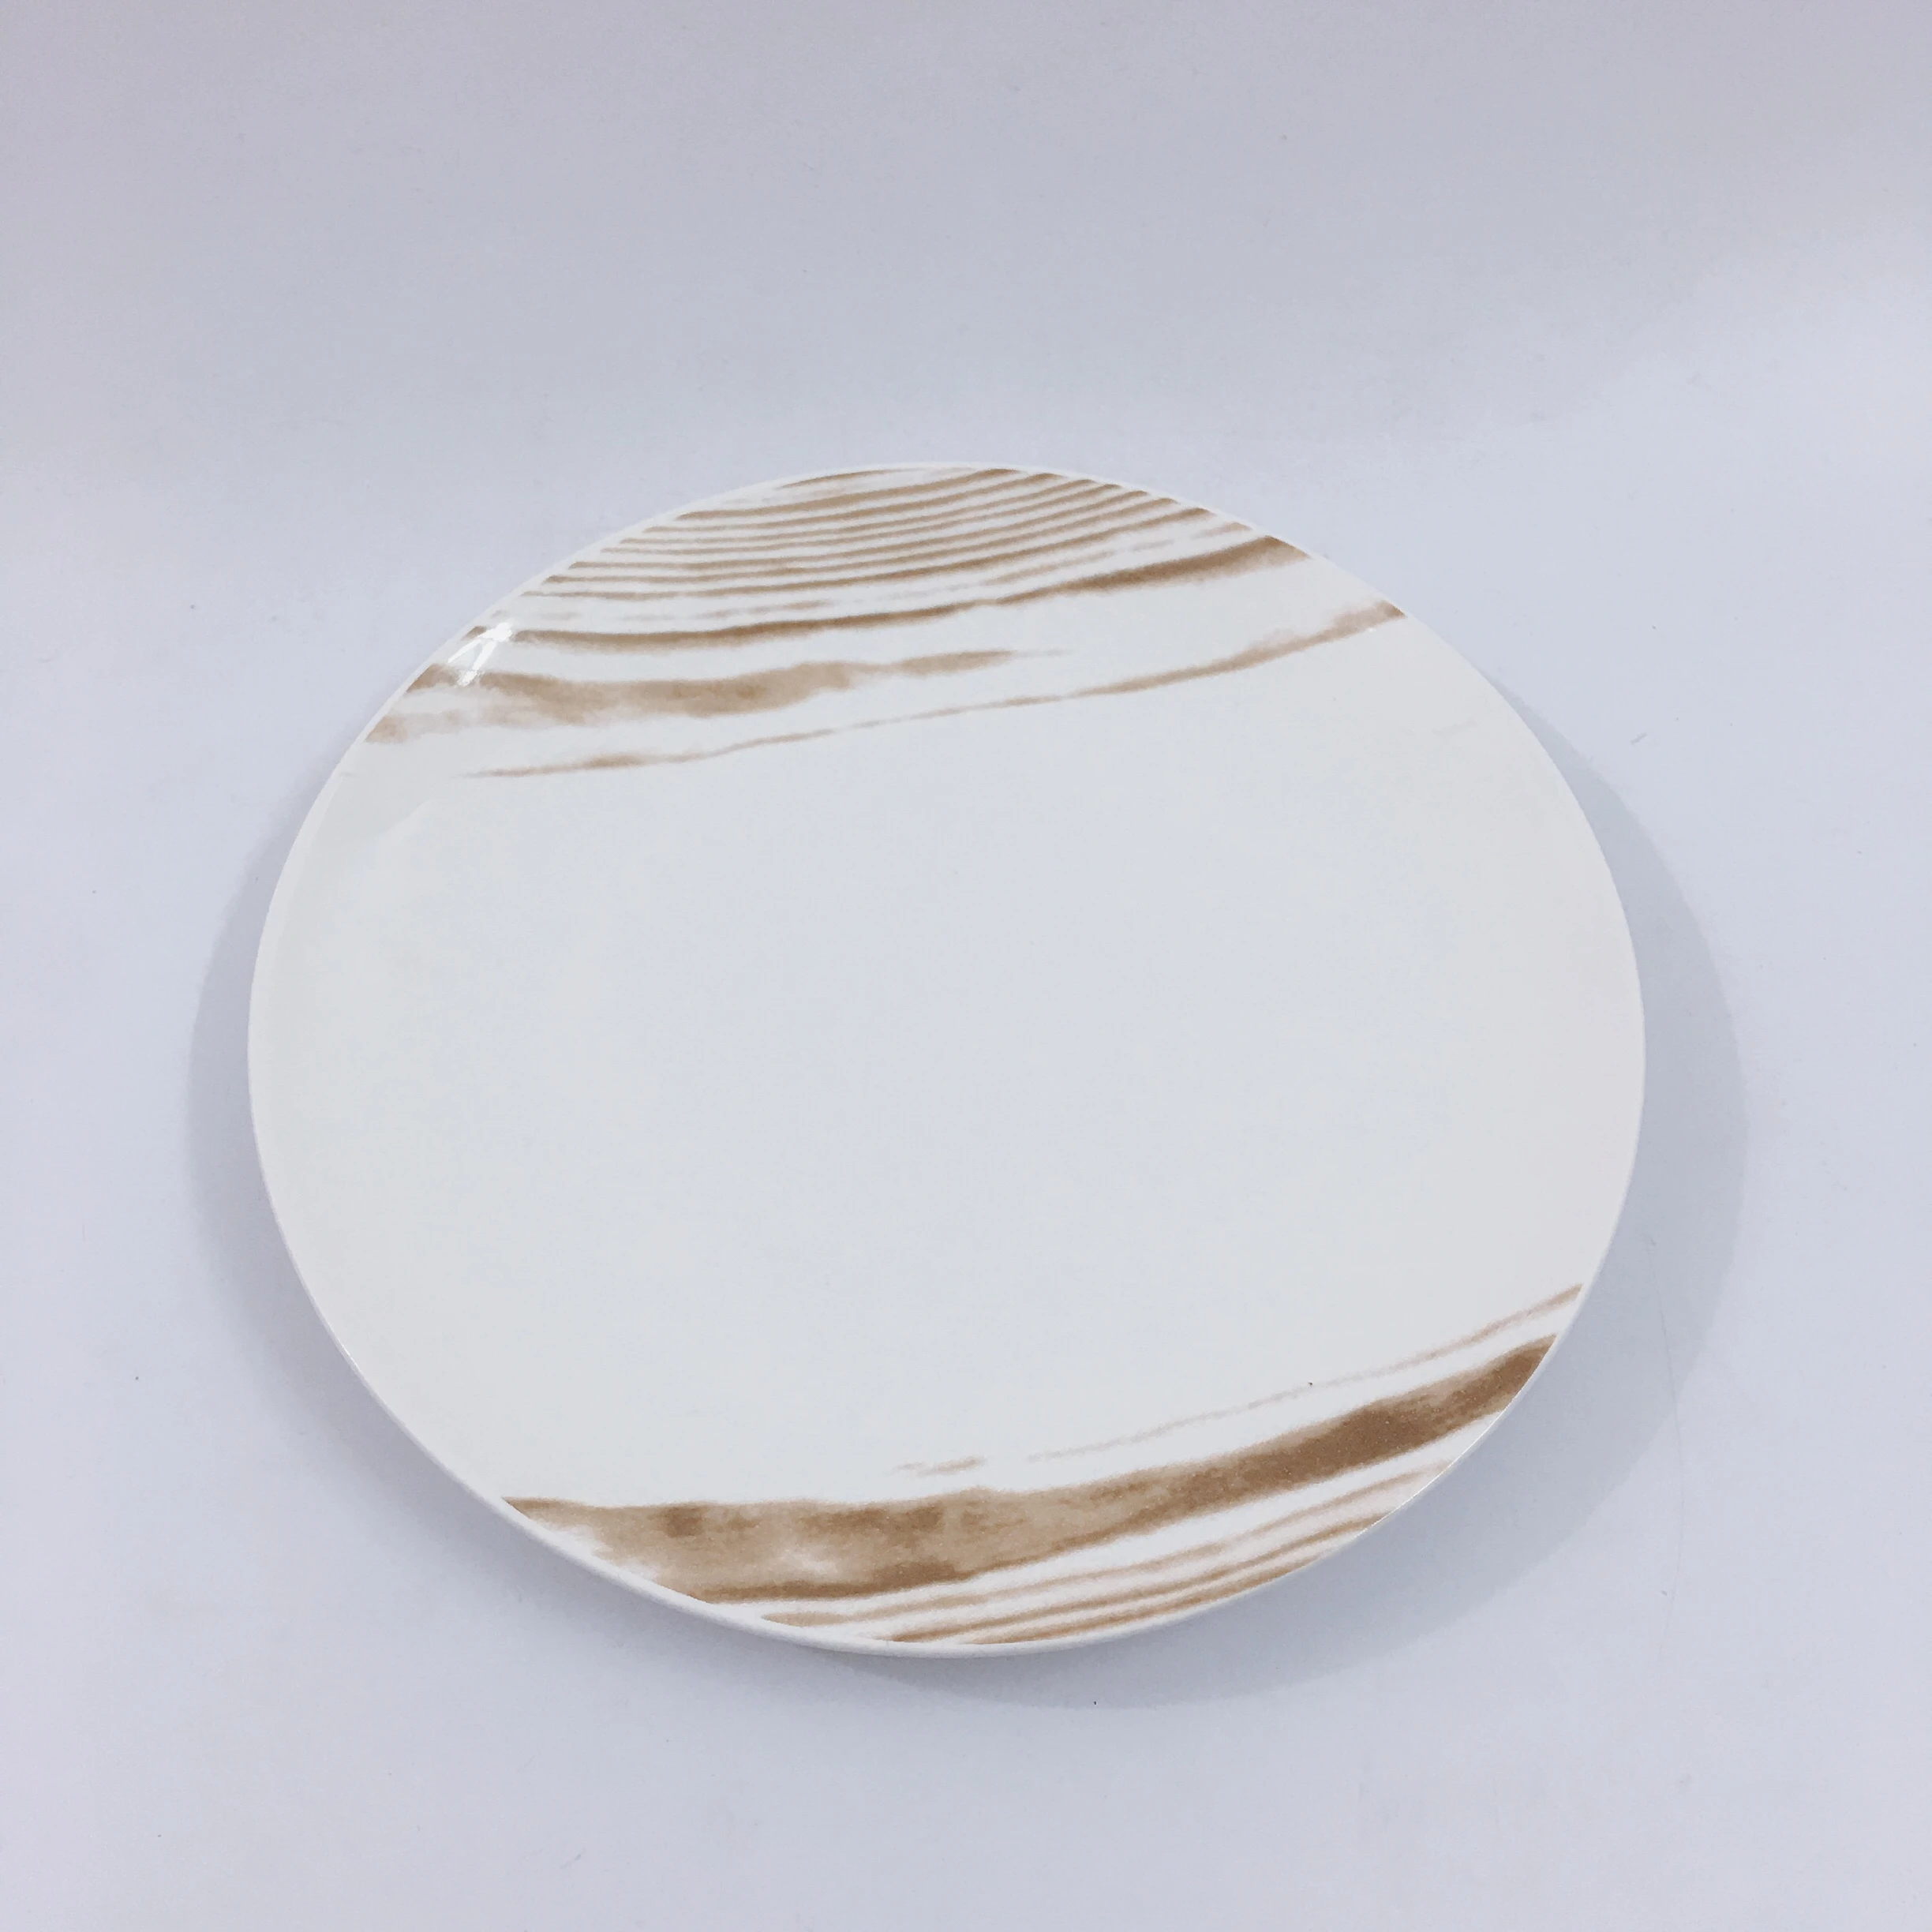 Eco friendly assiette multiple colored flat round shaped personalized printing on ceramic porcelain circle plates dish